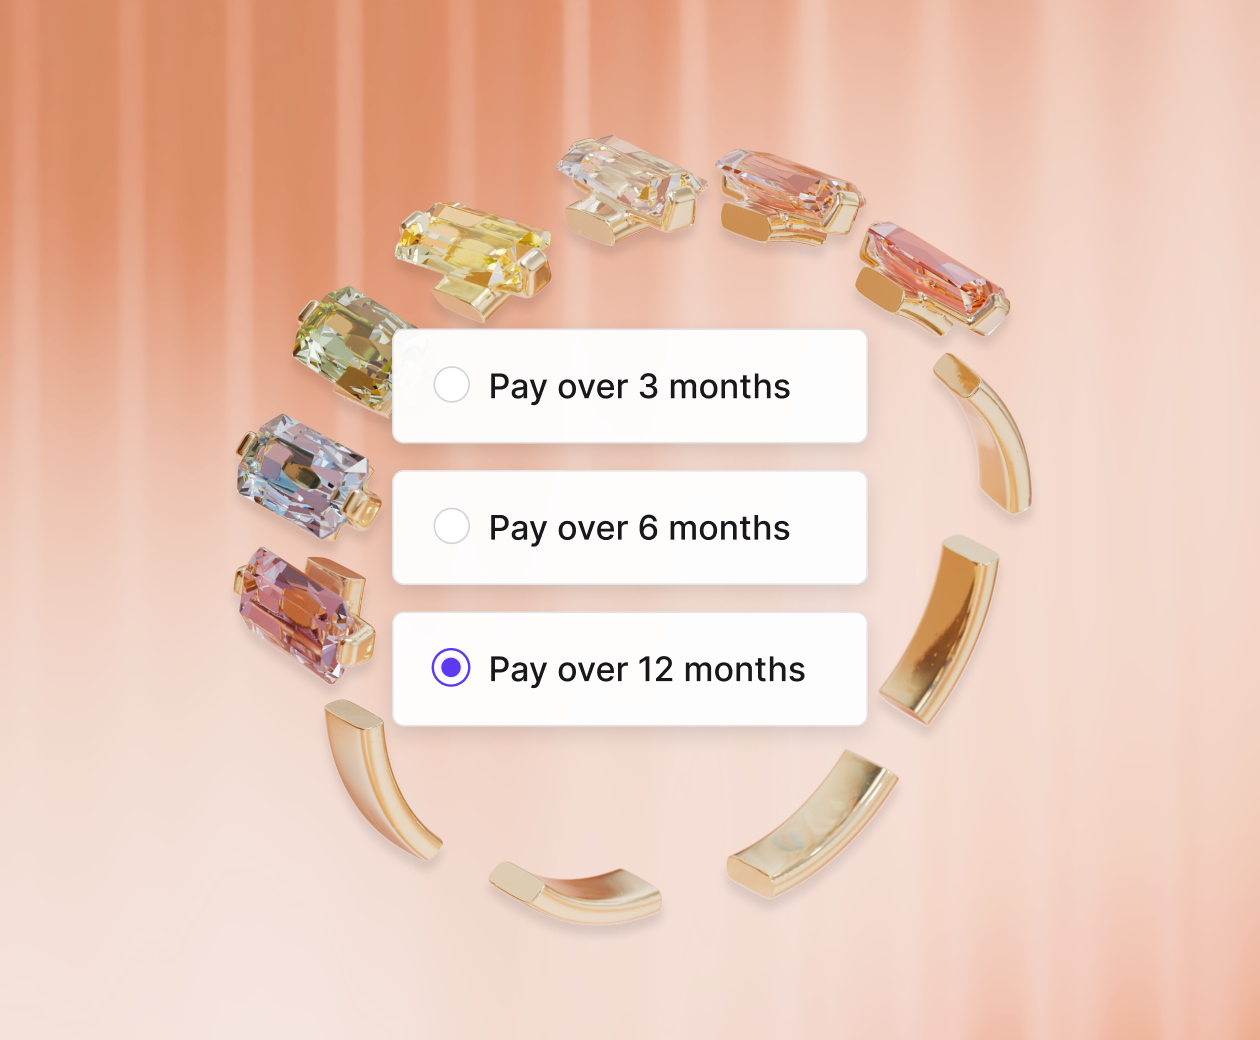 A gold ring with various gems split into several pieces to show how buyers can split payment for high value items into equal payments over 3, 6, or 12 months.